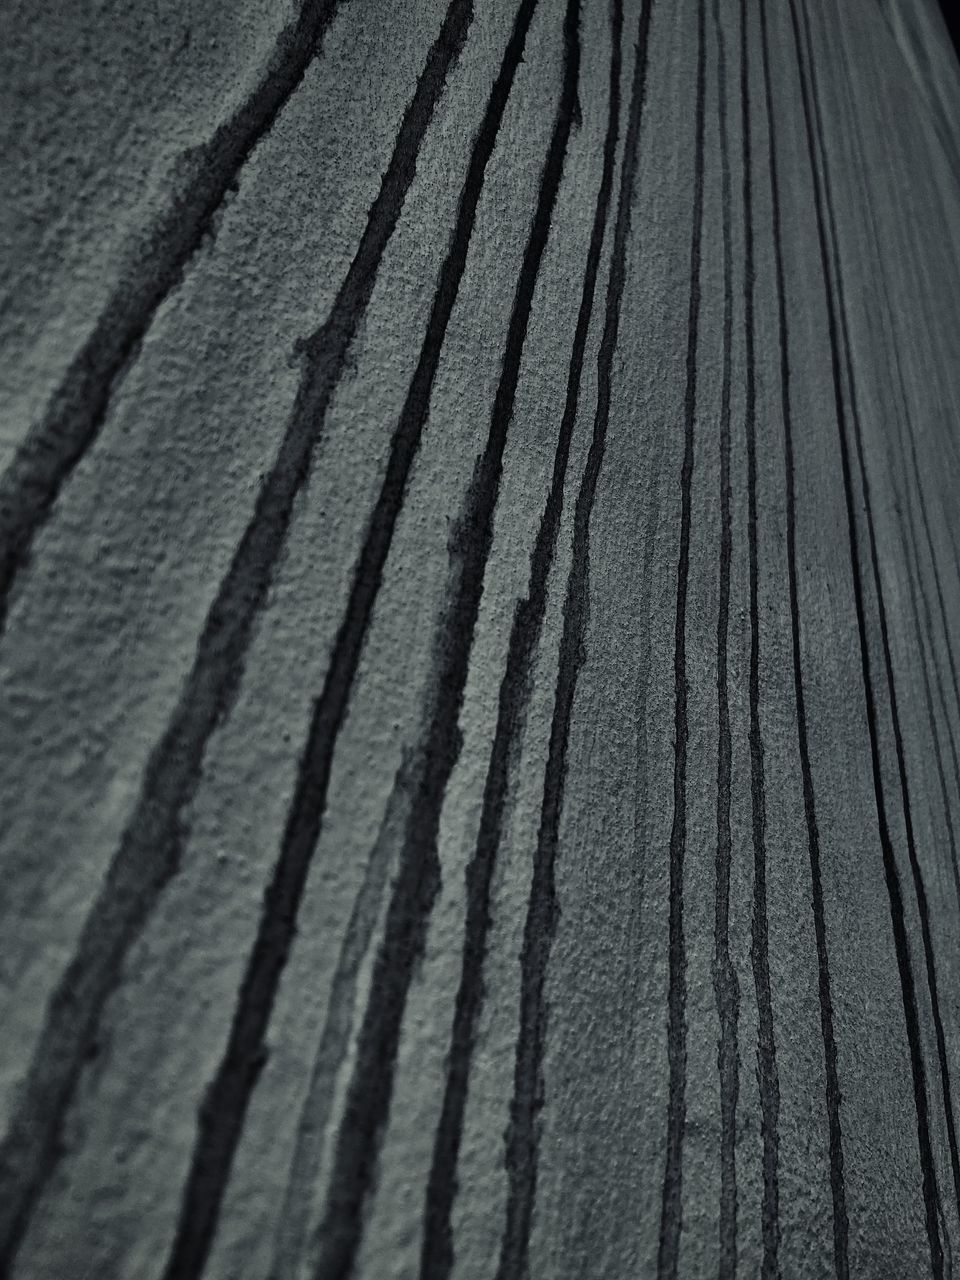 pattern, no people, line, full frame, backgrounds, black, black and white, textured, monochrome, wood, monochrome photography, day, nature, close-up, high angle view, land, outdoors, sunlight, floor, shadow, white, striped